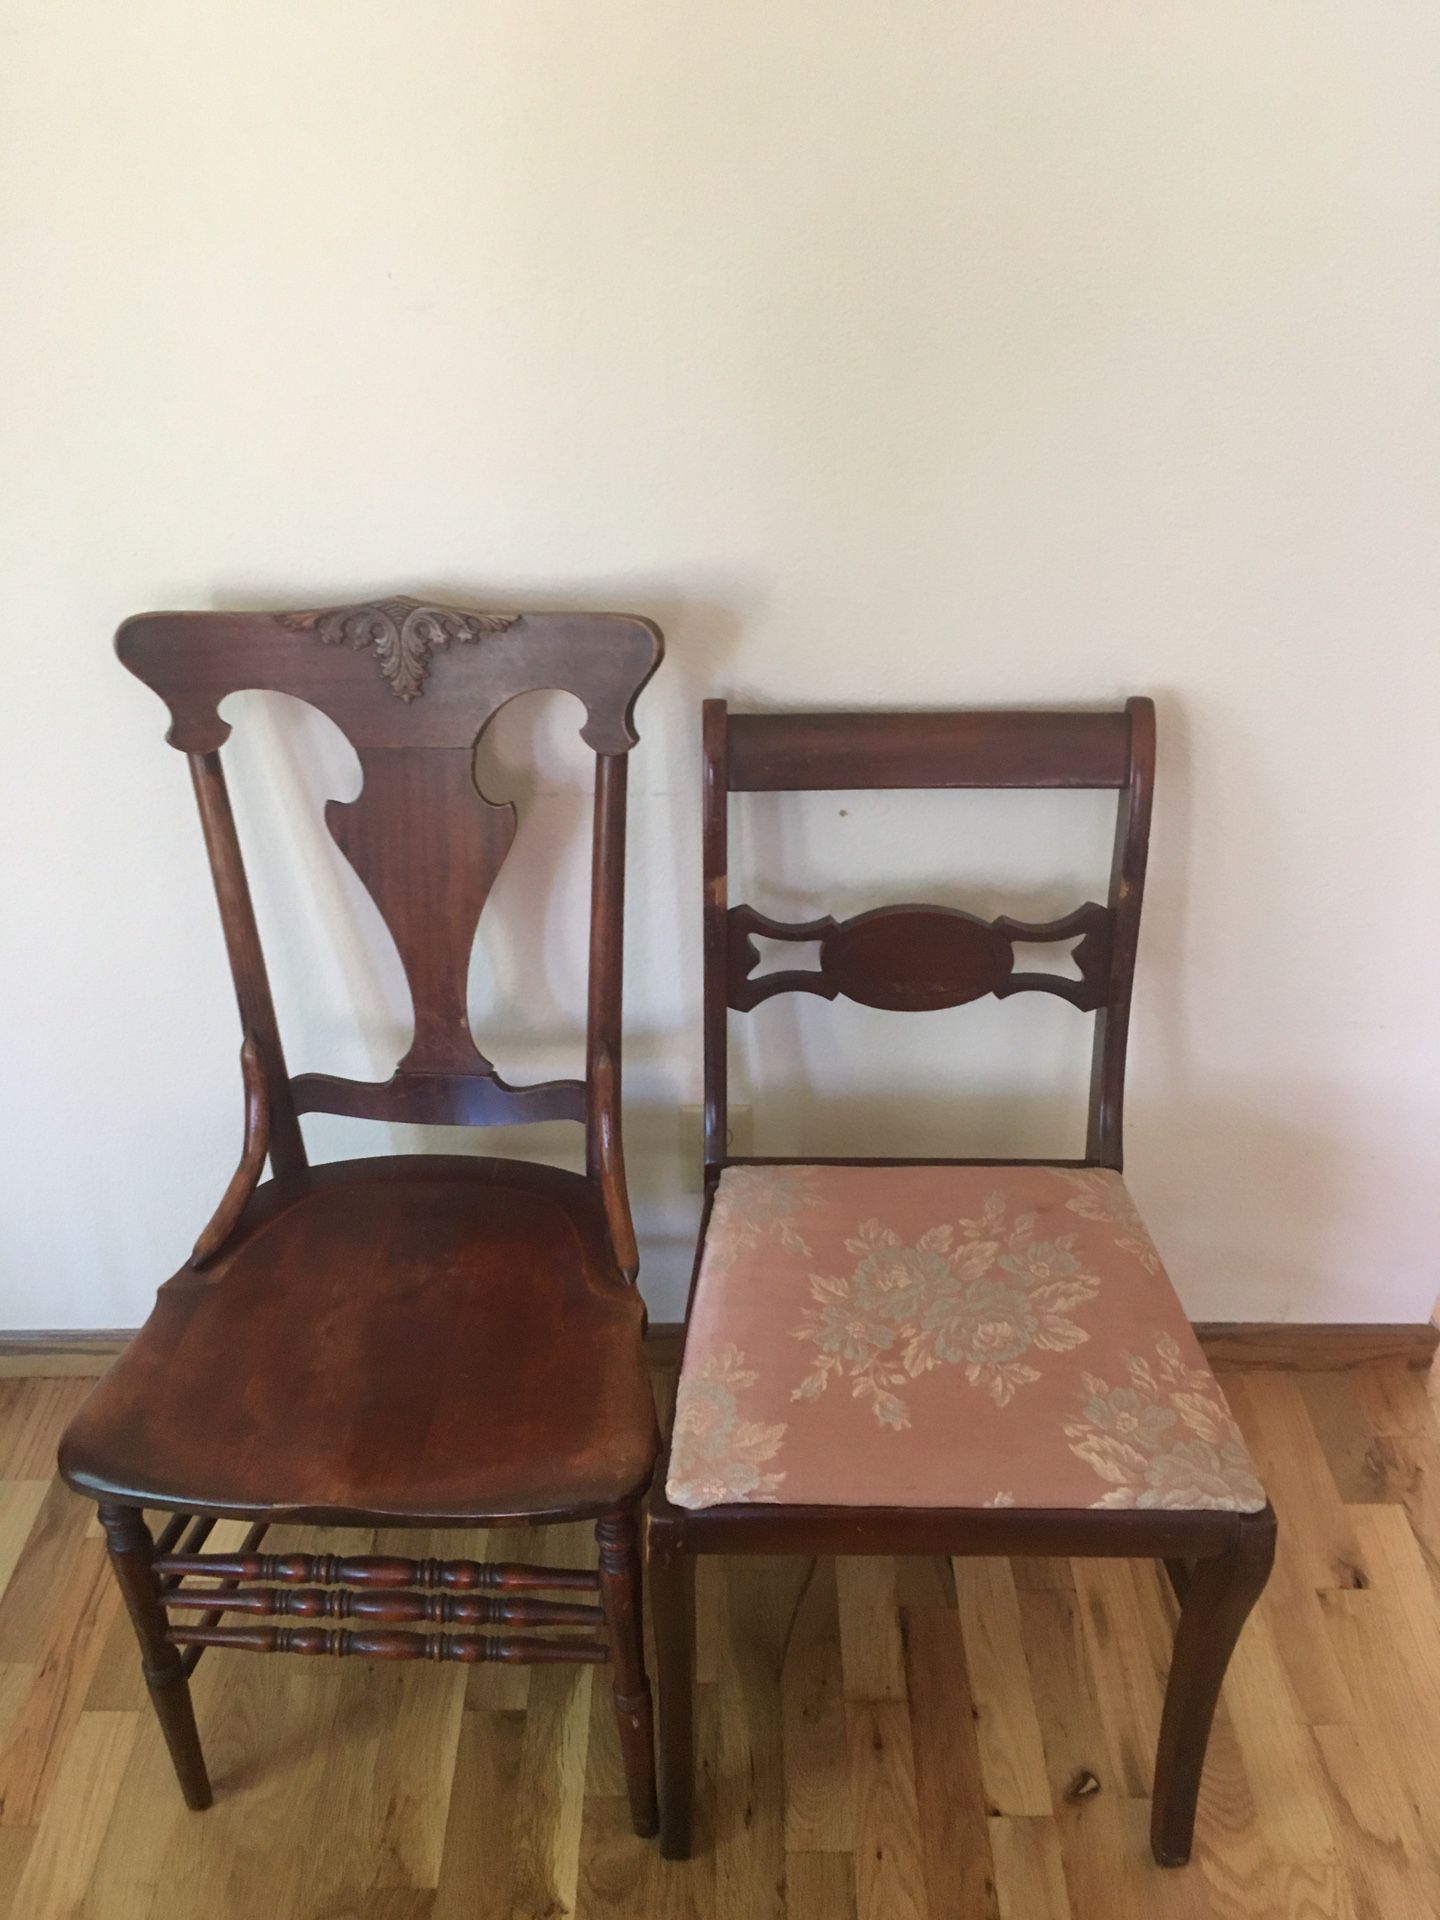 Antique chairs from the 1940s